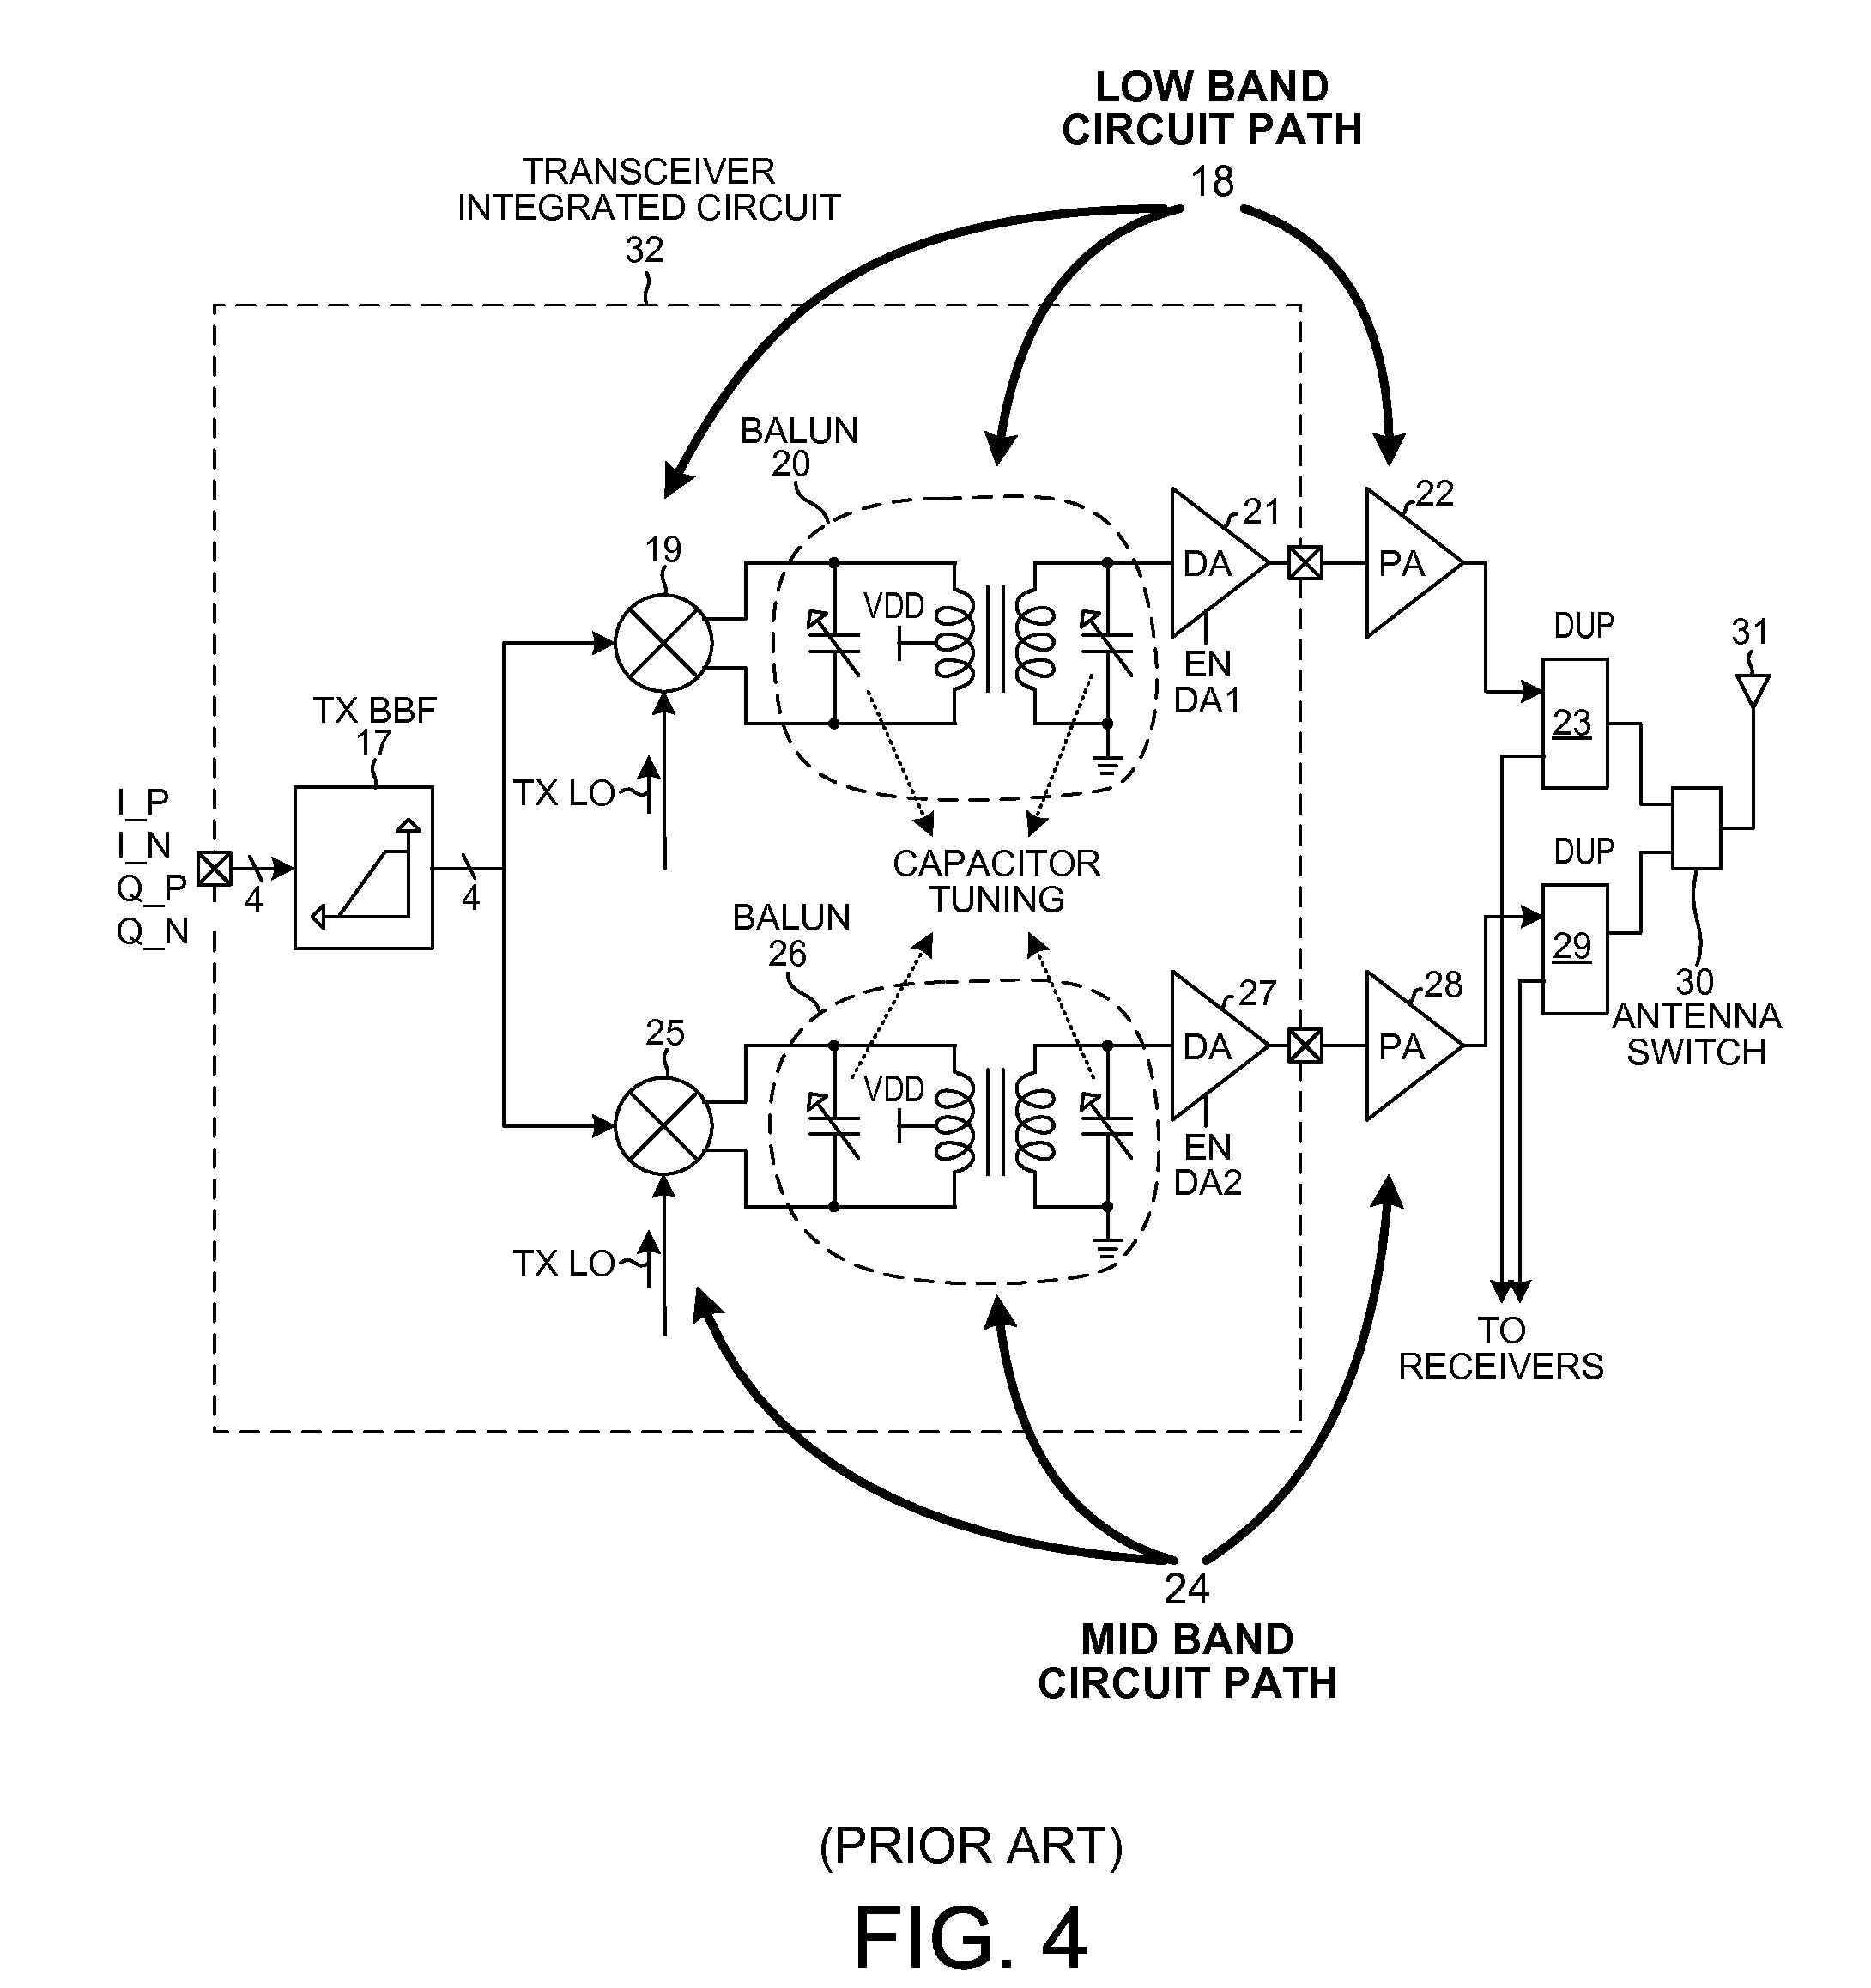 Wideband balun having a single primary and multiple secondaries